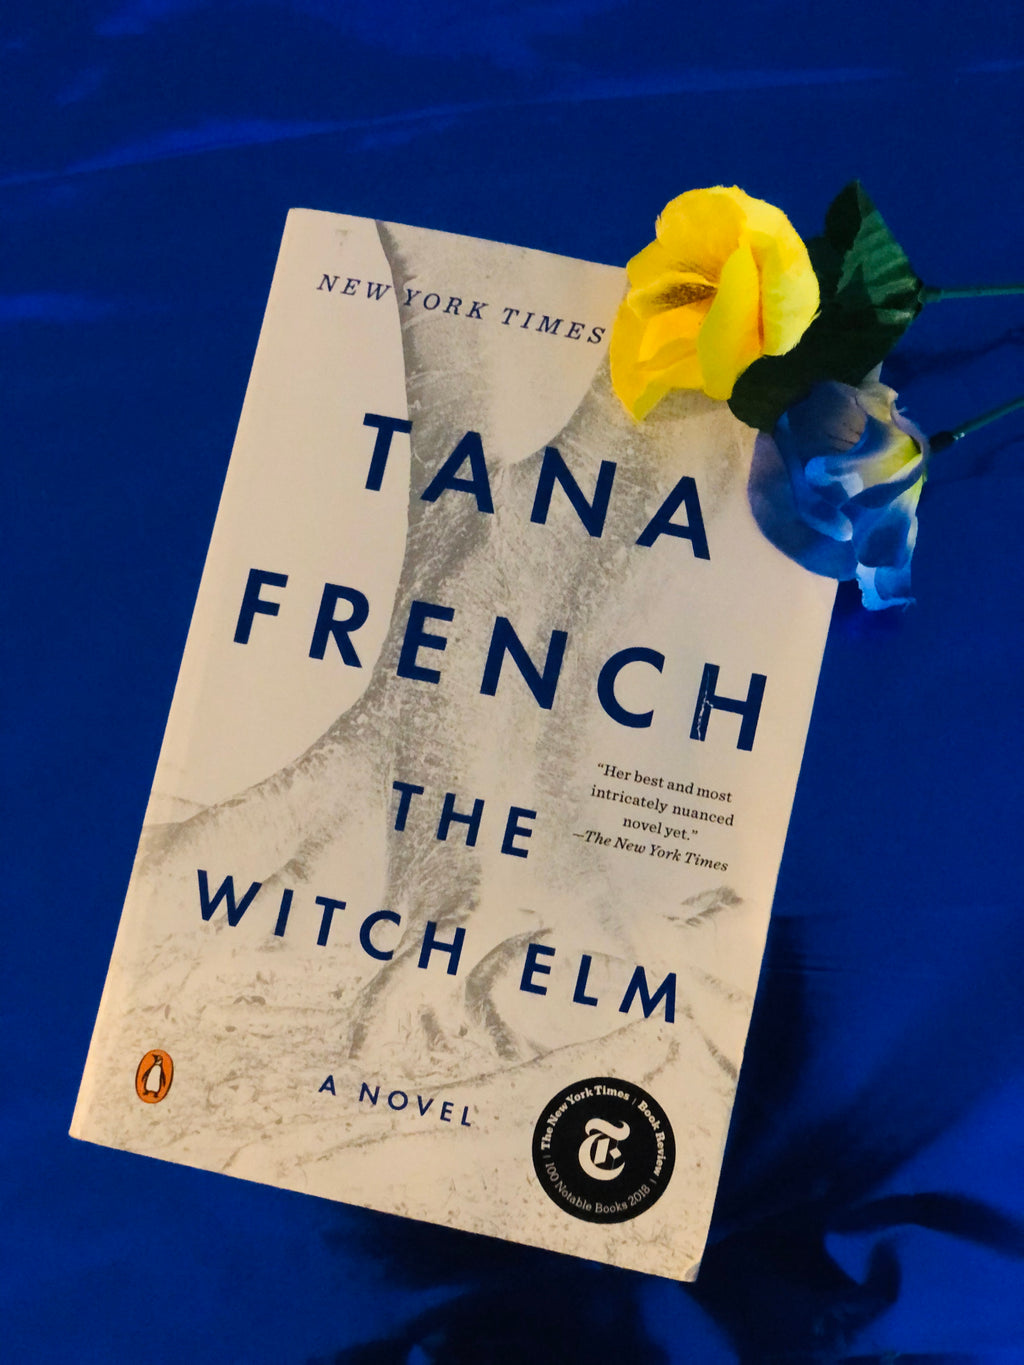 The Witch Elm- By Tana French